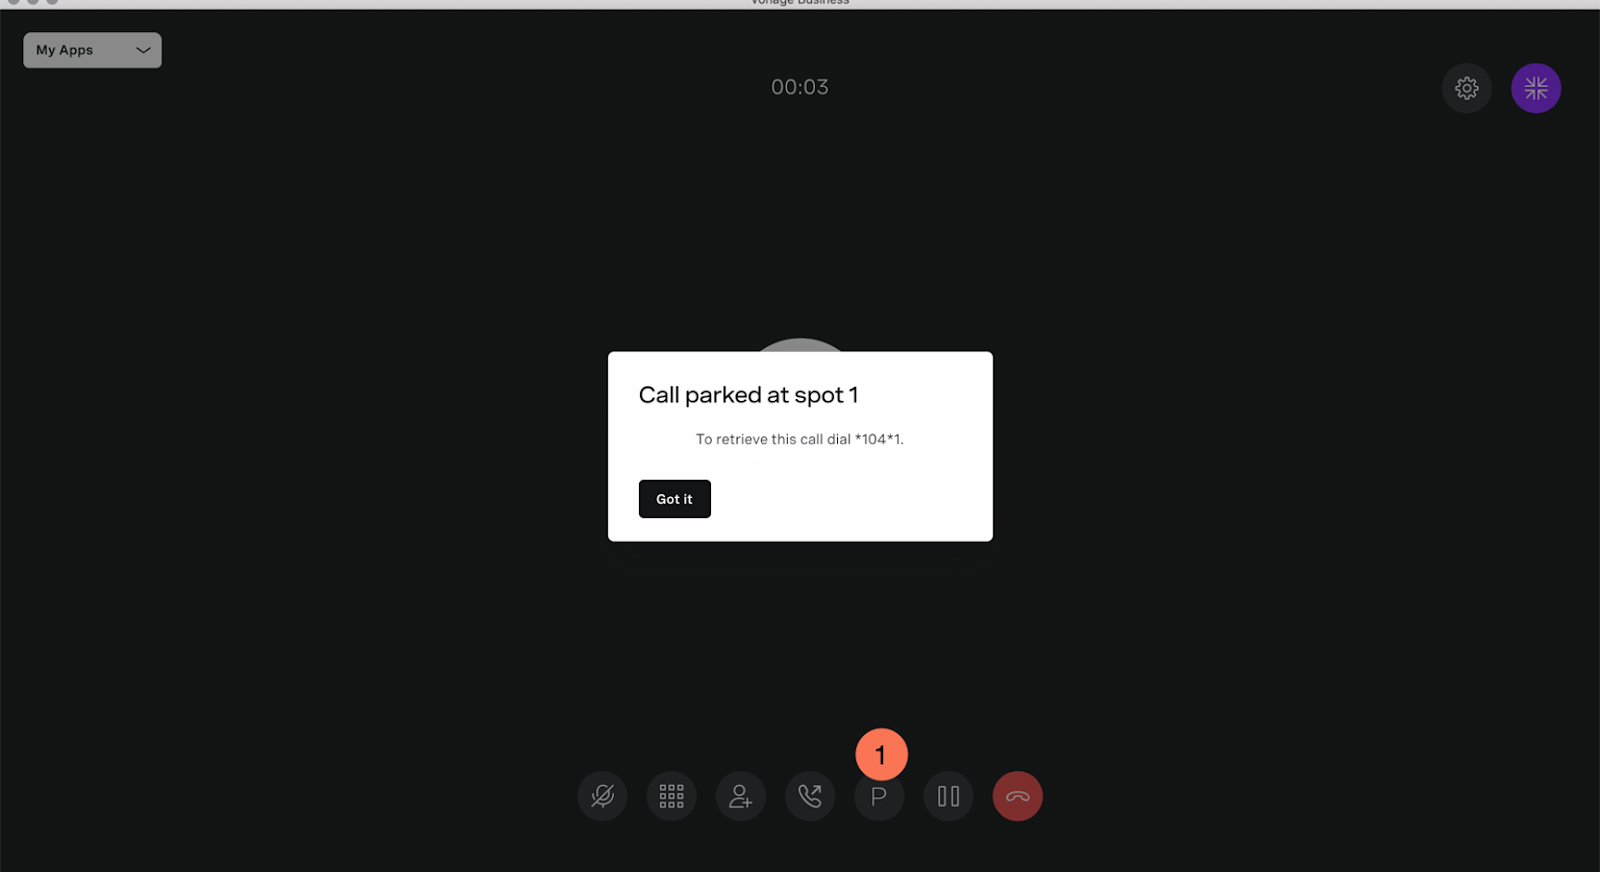 Vonage desktop interface showing a live call and a dialog box notifying the user that the call is parked at spot 1.